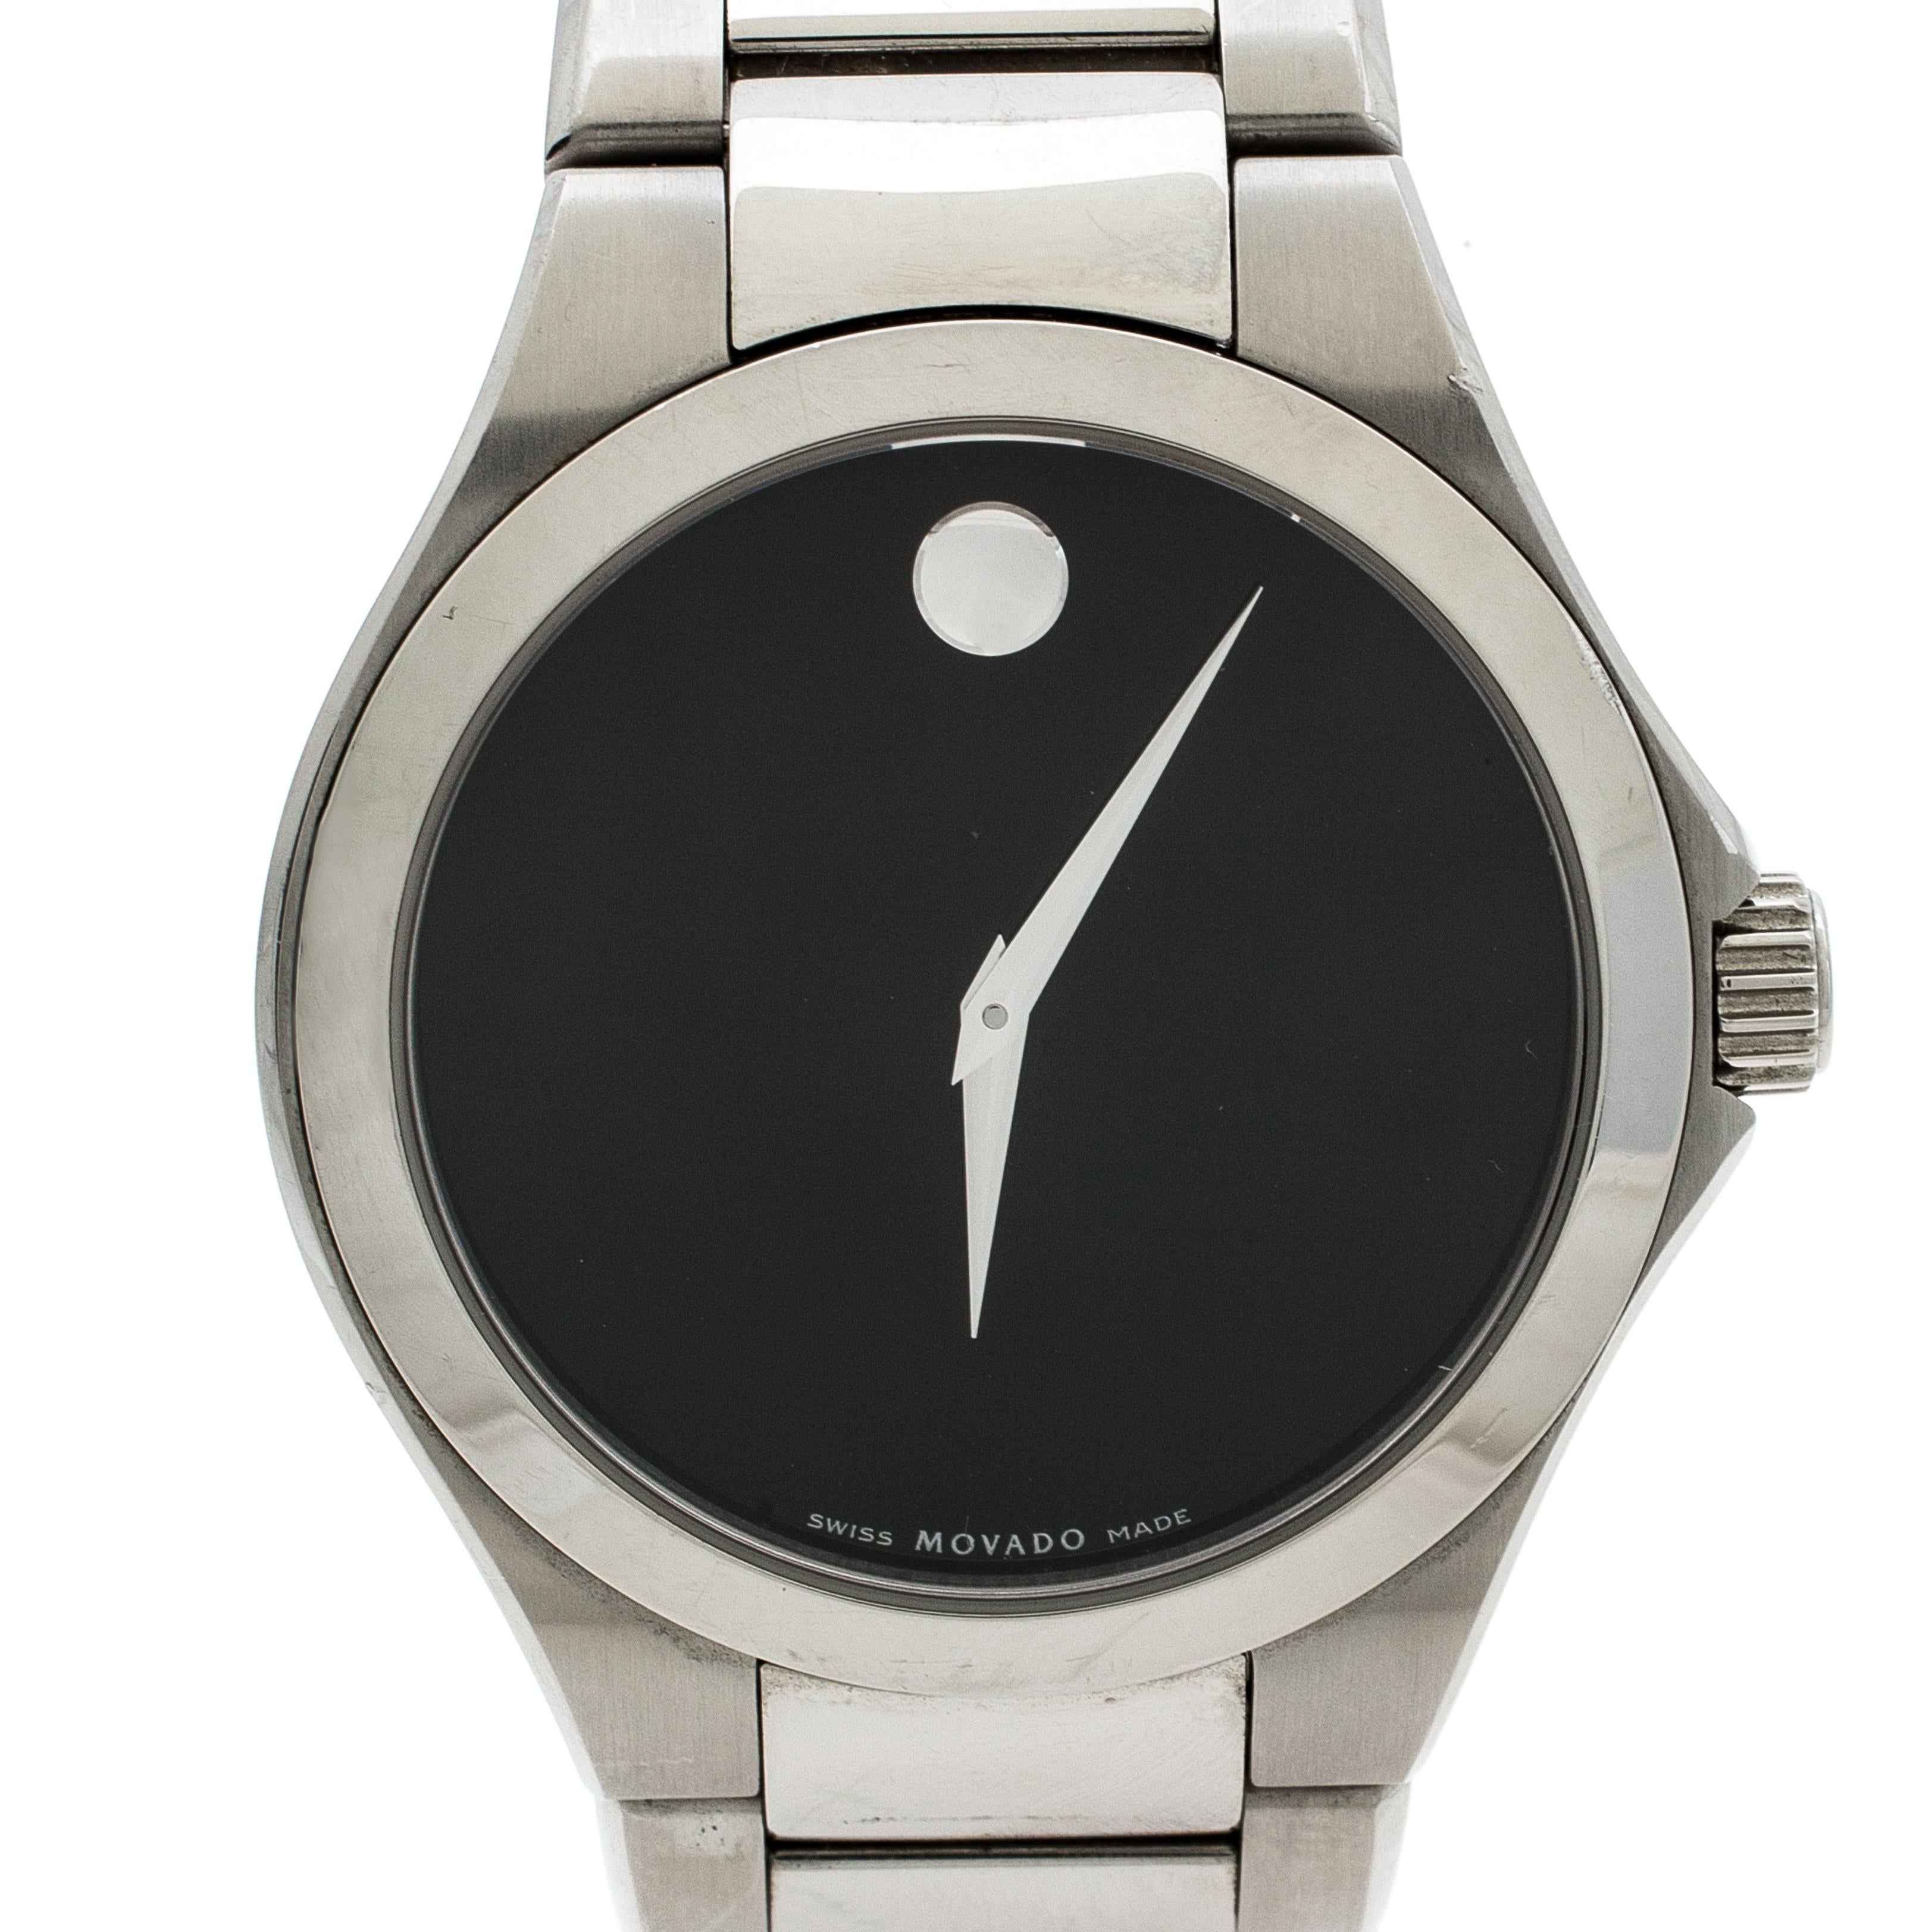 Built to assist you every day, this Movado wristwatch comes with a stainless steel case that is held by a bracelet strap. It follows a quartz movement and features a flat black dial with the signature Movado dot at the 12 o' clock position and two